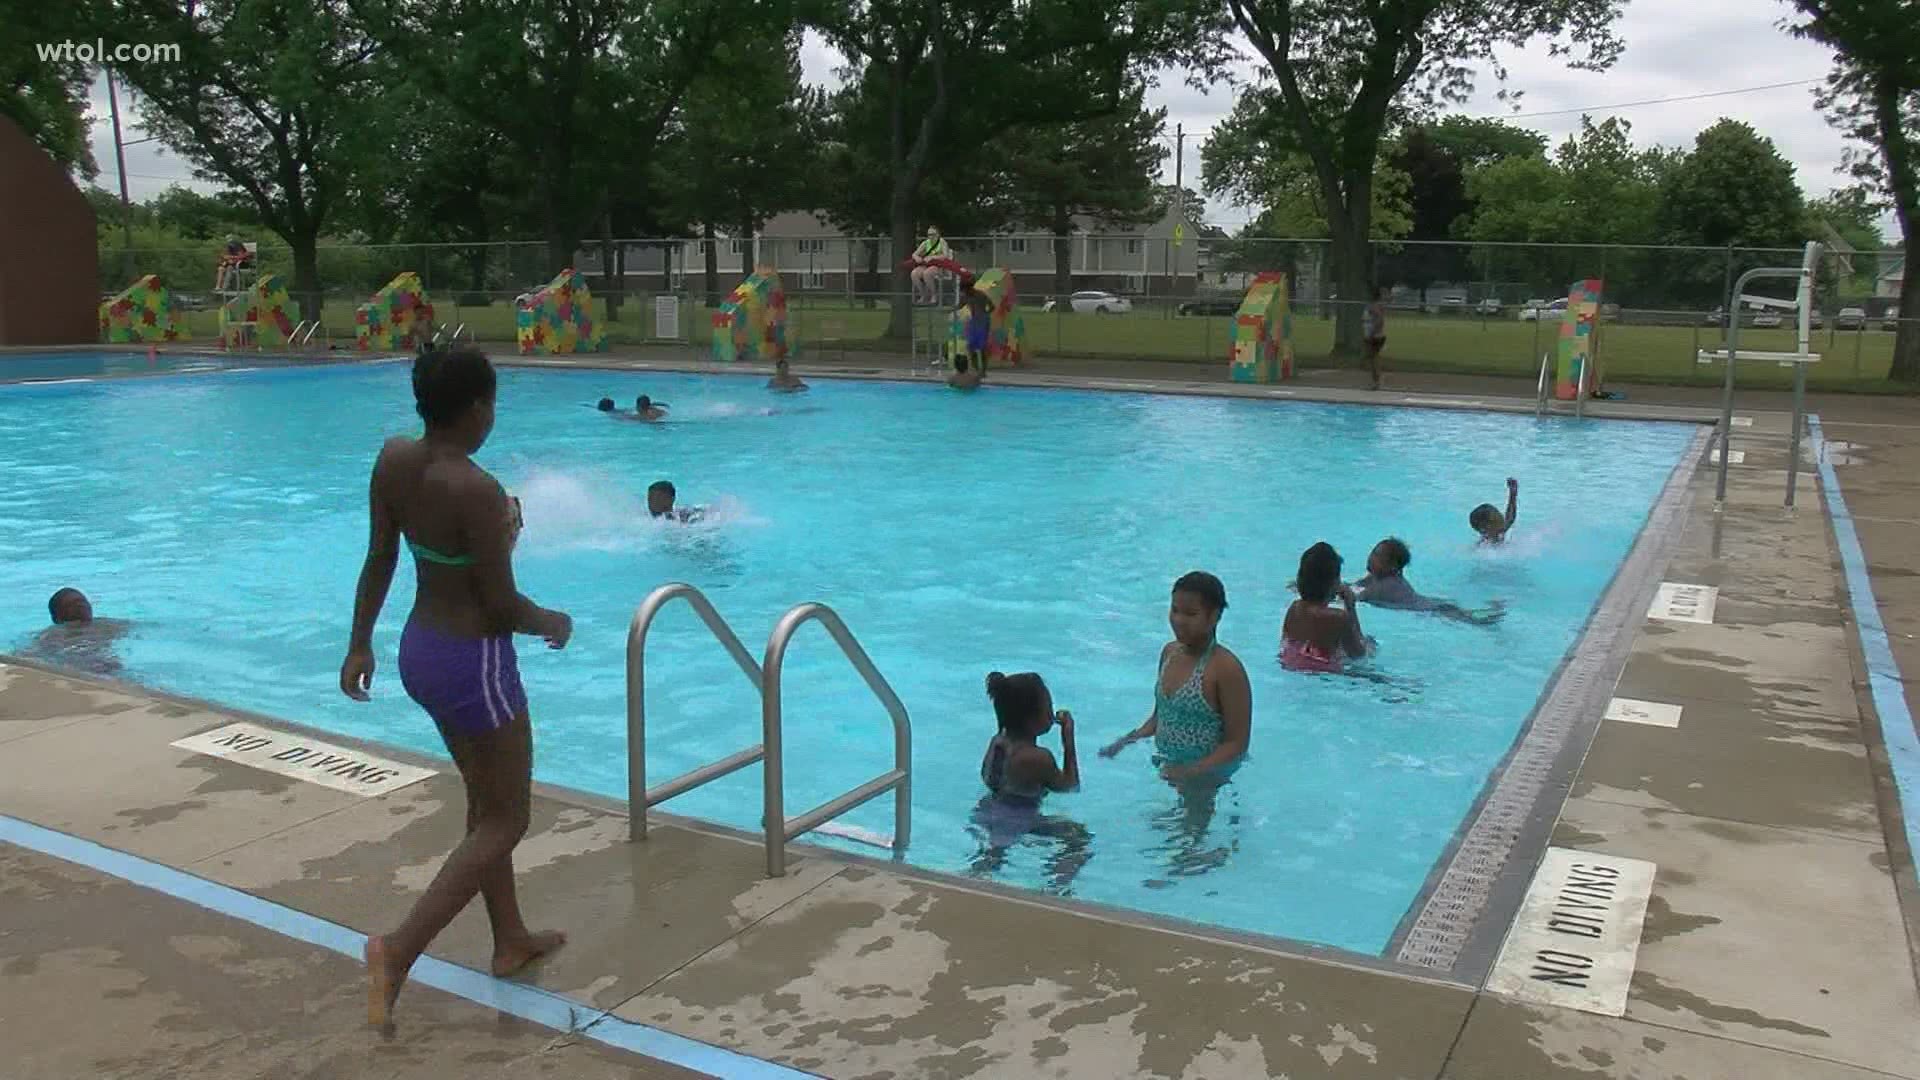 With summer-like weather expected to continue, many families are likely making plans to be out enjoying the water.